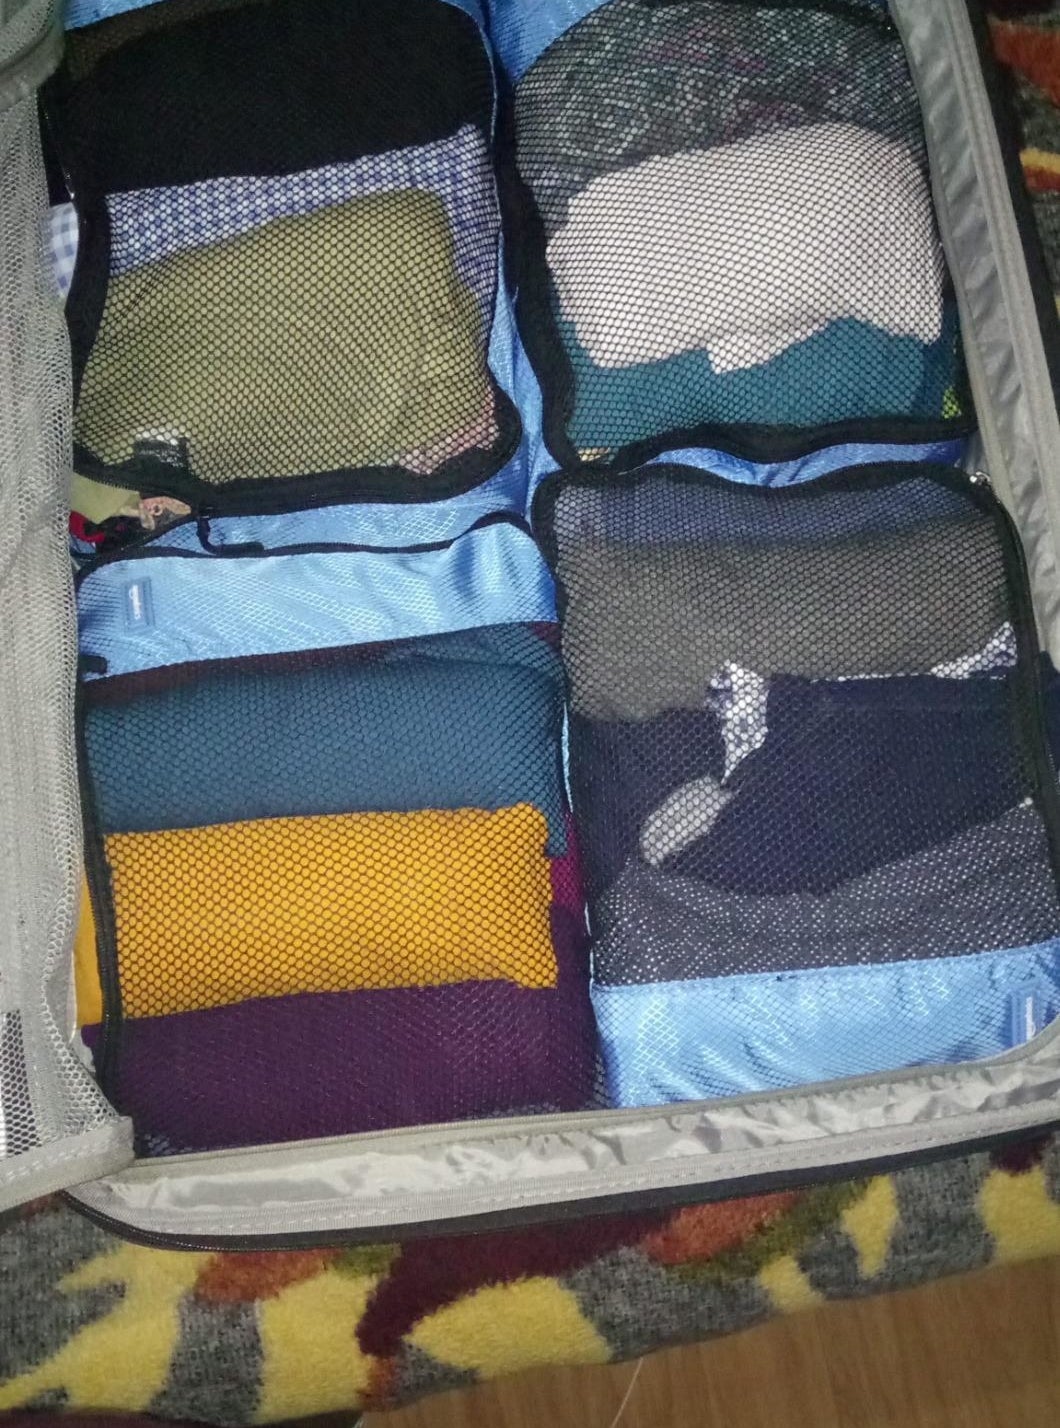 reviewer&#x27;s suitcase filled with four of the packing cubes, each containing neatly rolled clothes